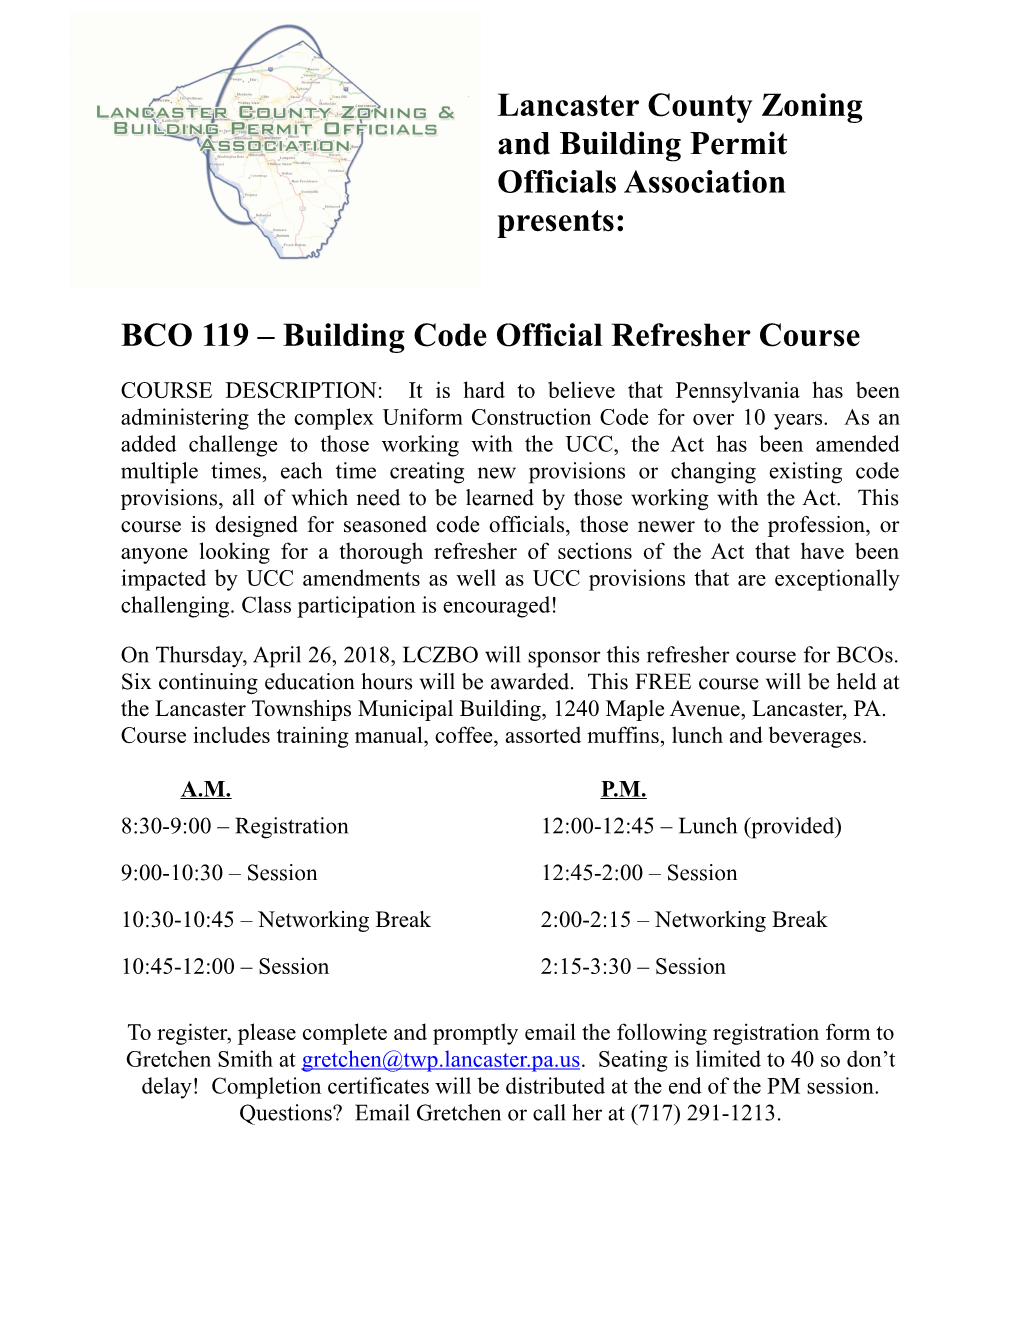 BCO 119 Building Code Official Refresher Course